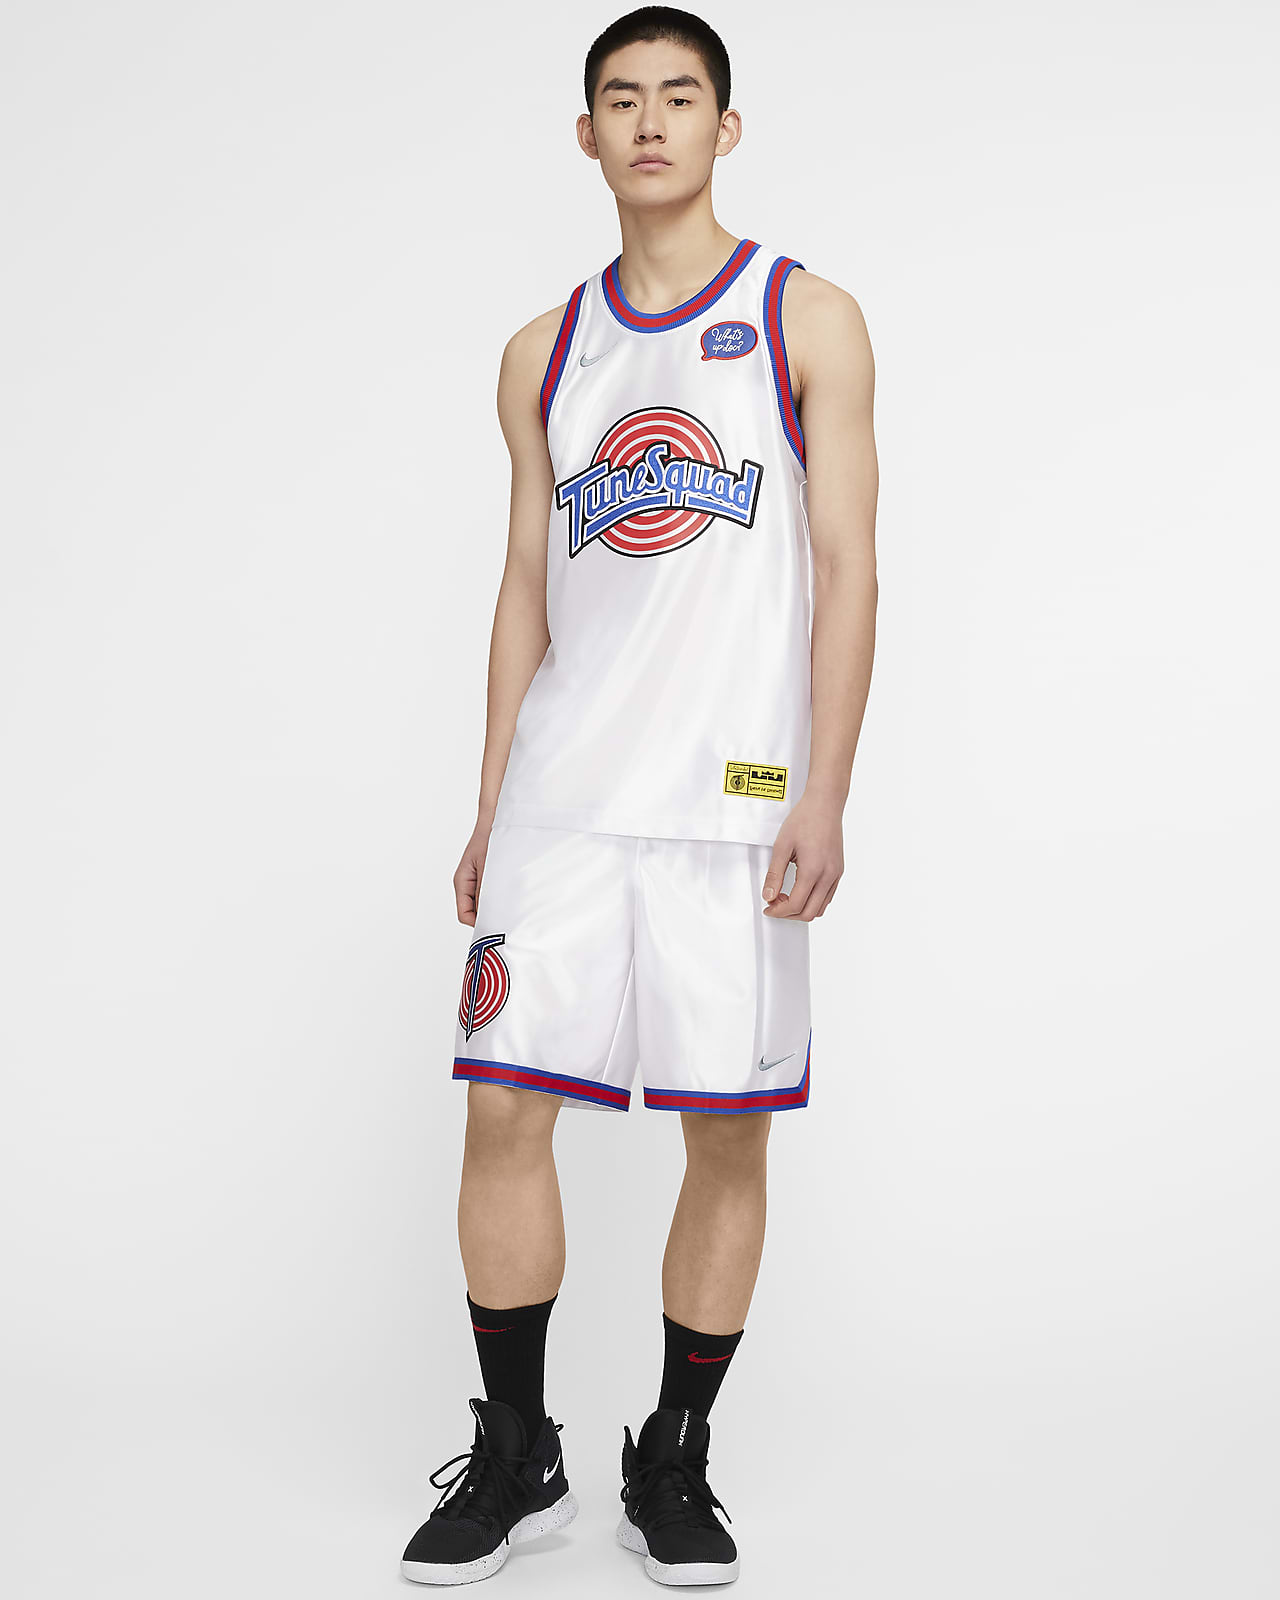 Nike 'Tune Squad' Basketball Team Jerseys Worn By Looney Tunes